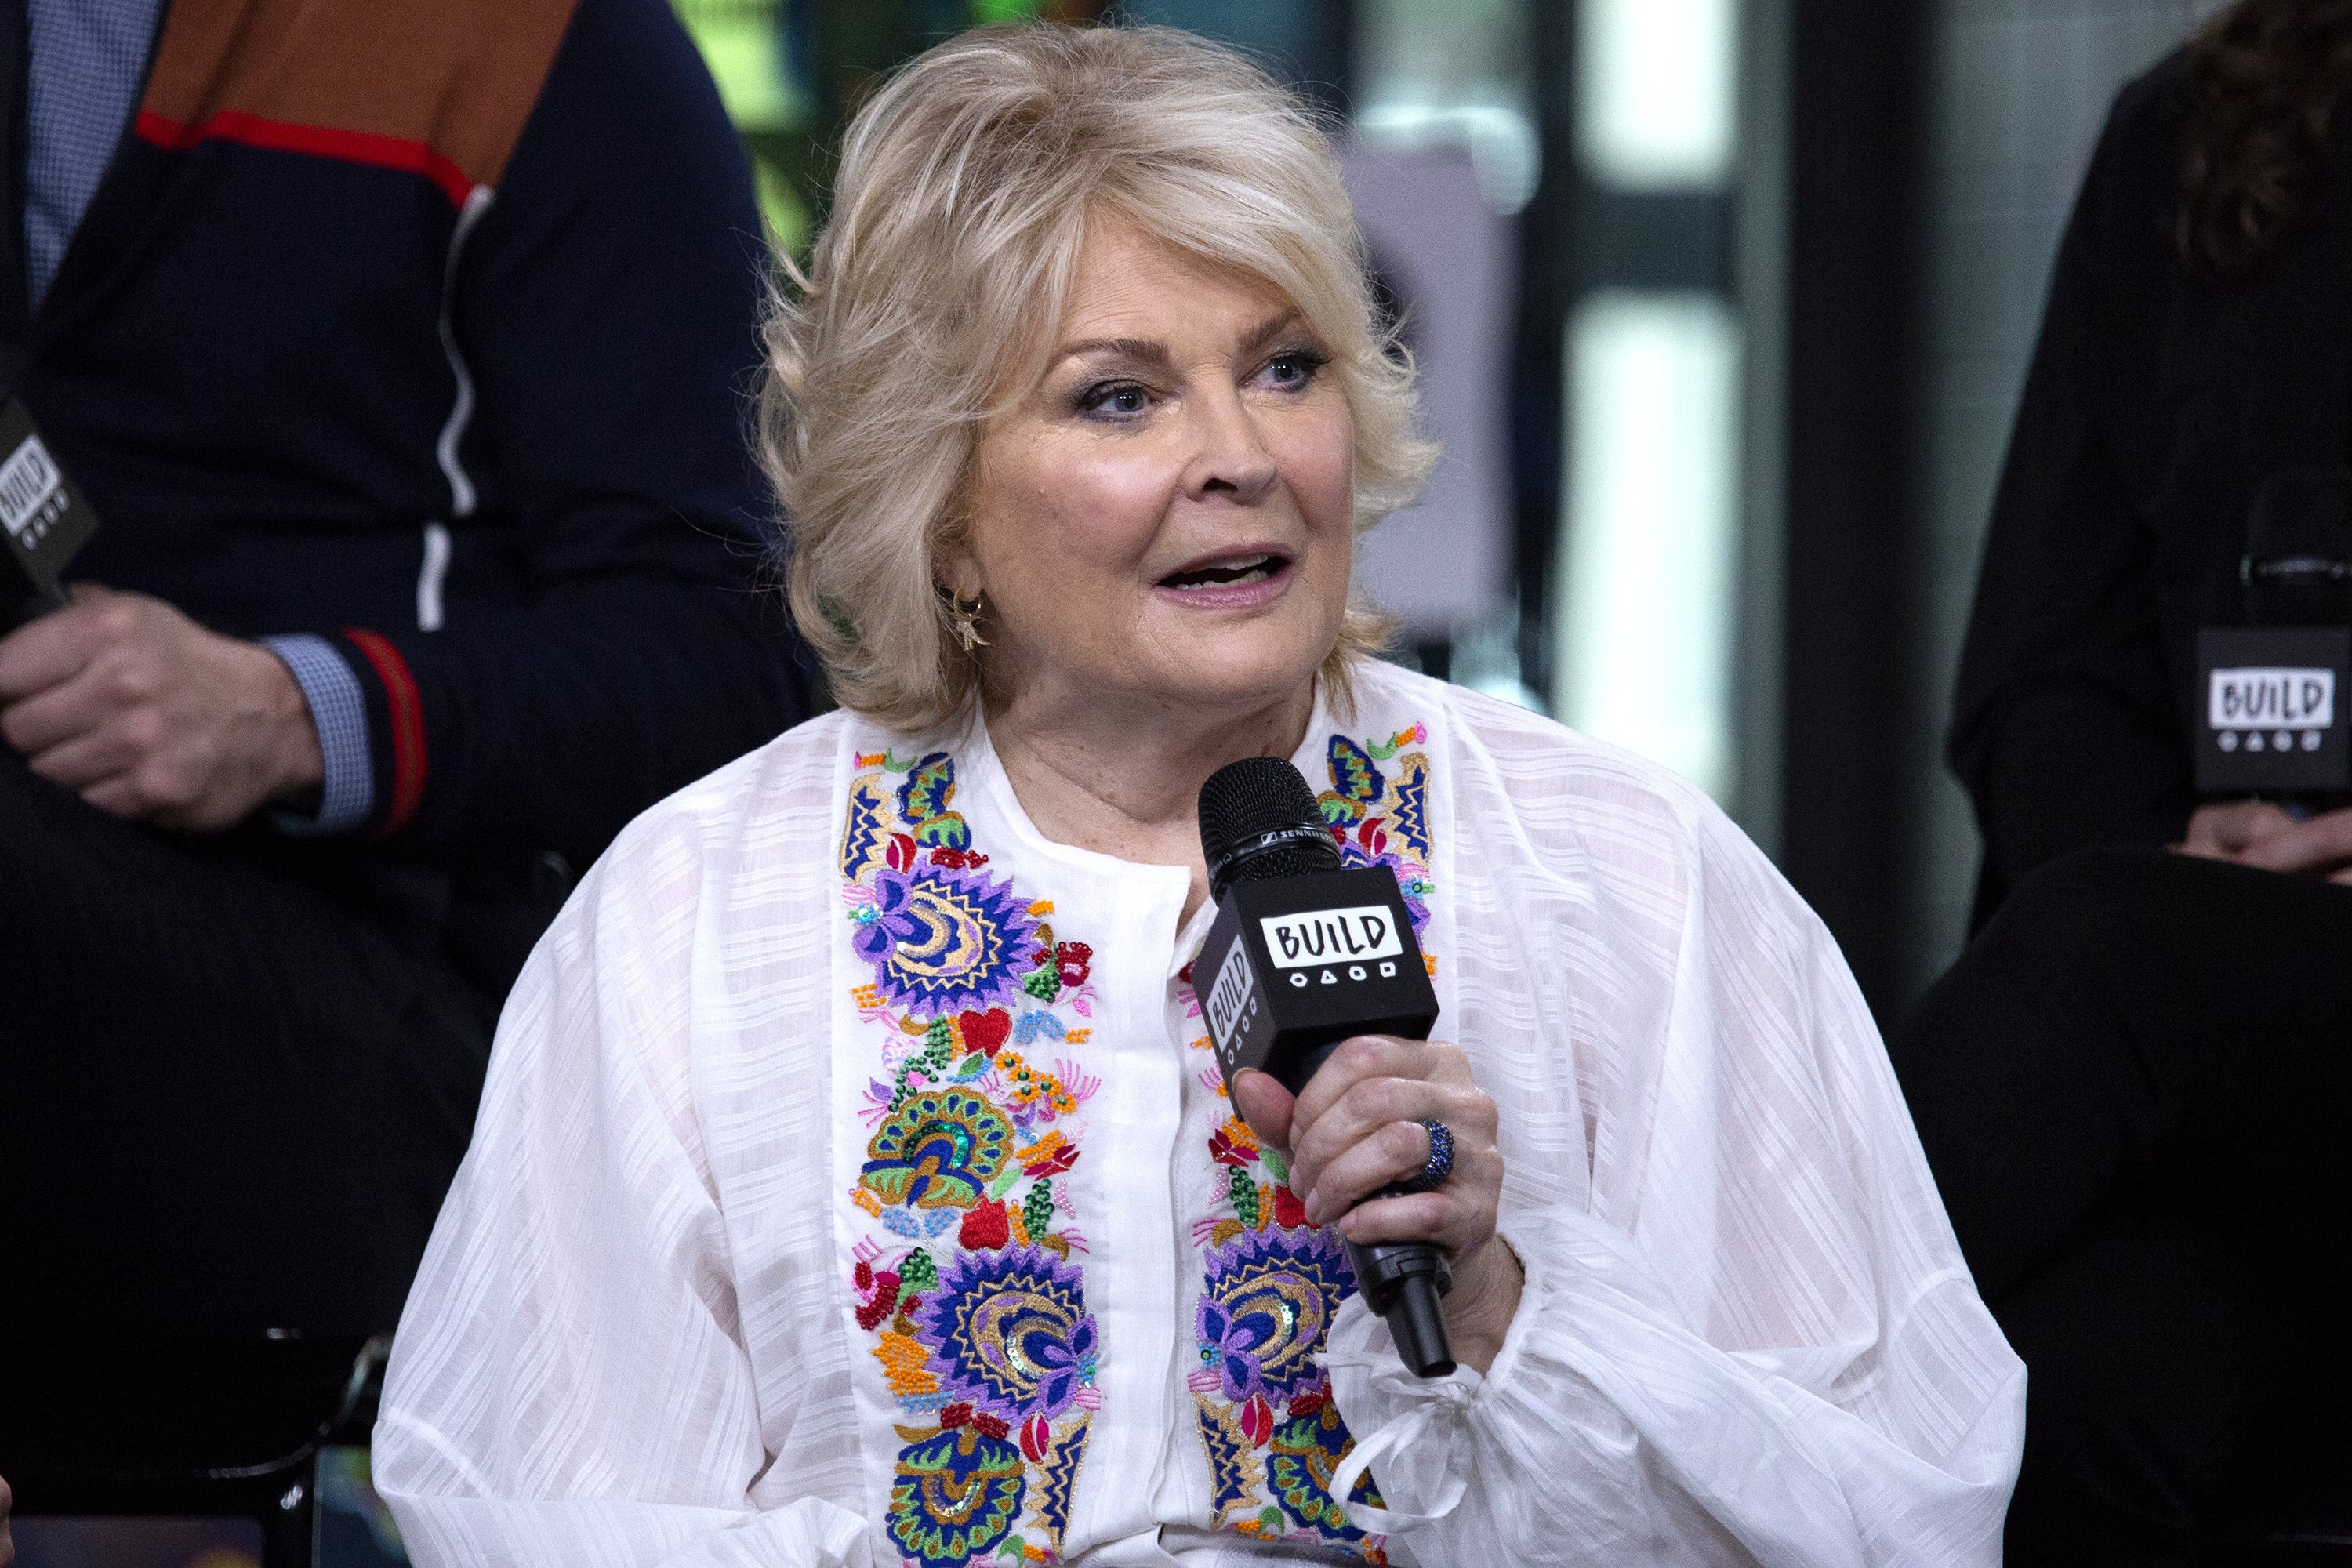 Candice Bergen visits AOL Build at Build Studio on May 15, 2018. | Photo: Getty Images